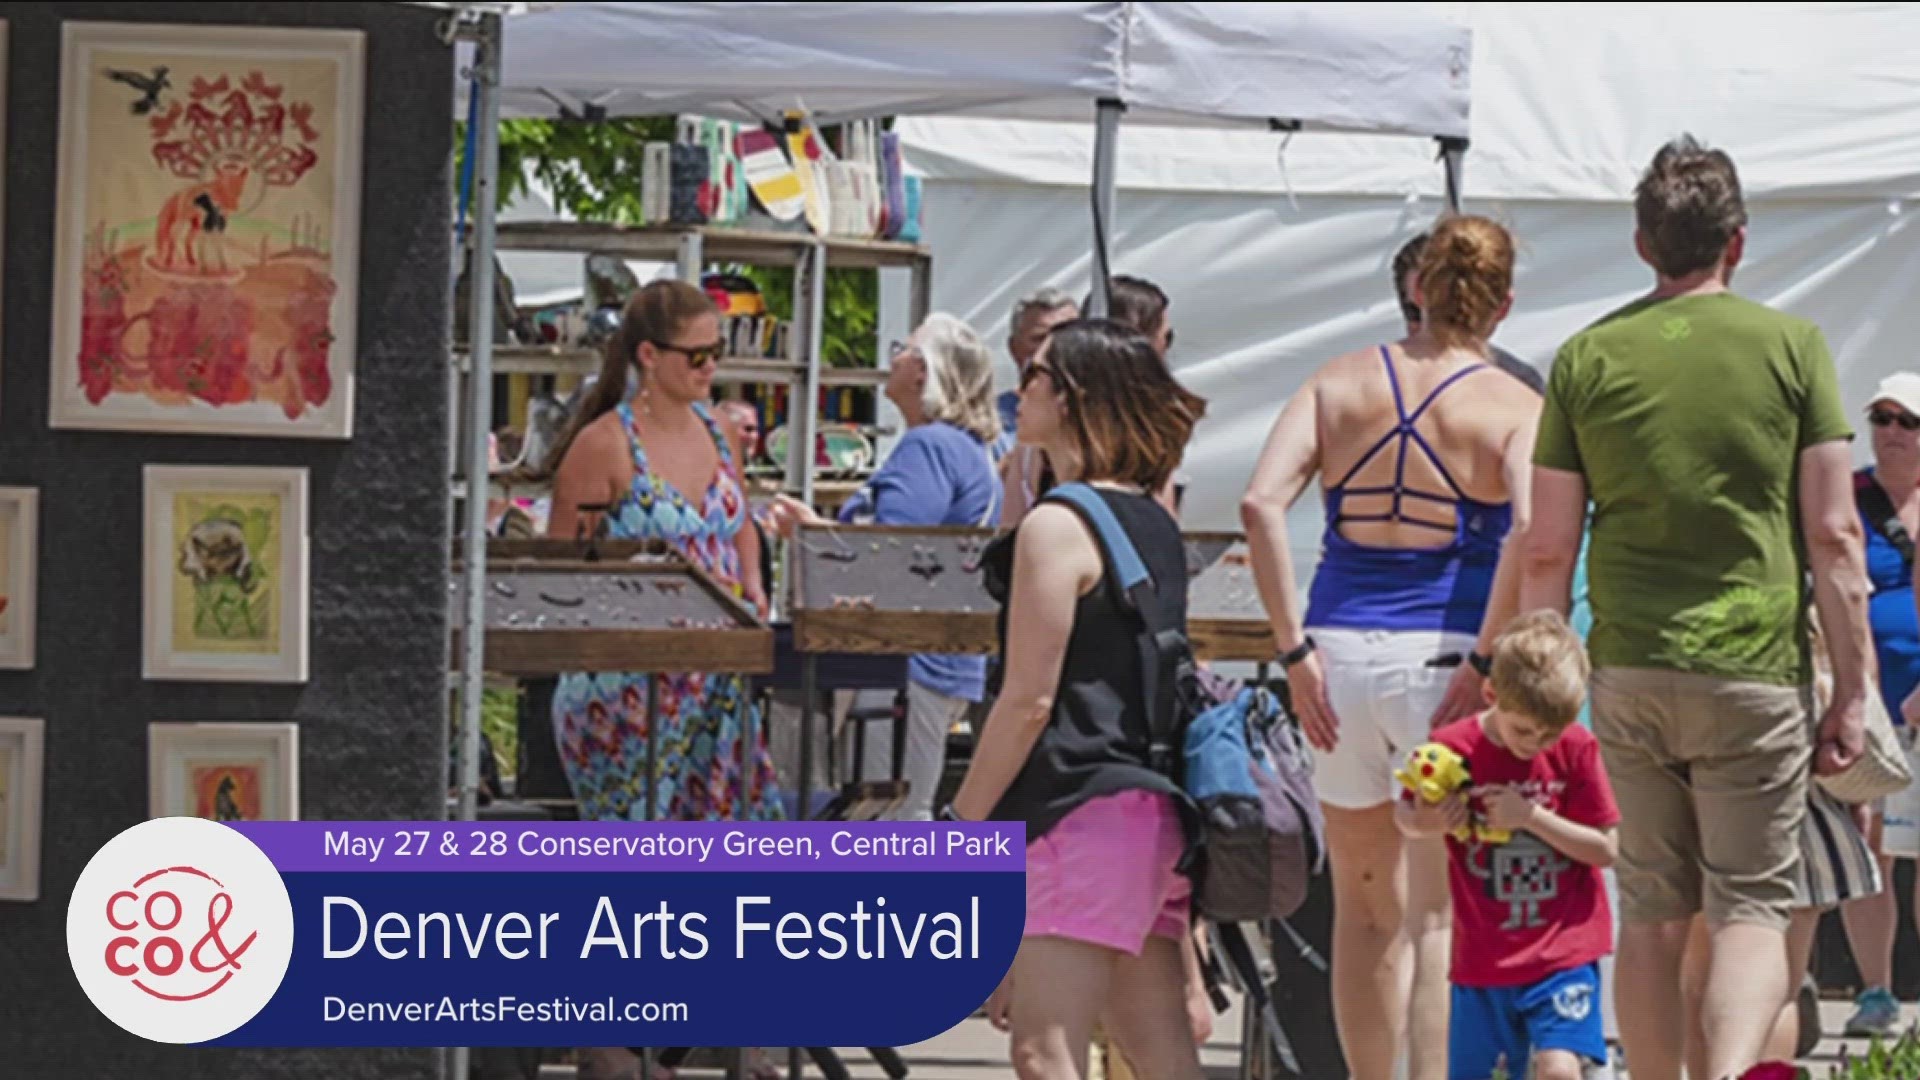 Stop by the Denver Arts Festival at Conservatory Green in Central Park this Memorial Day Weekend. Learn more at DenverArtsFestival.com.